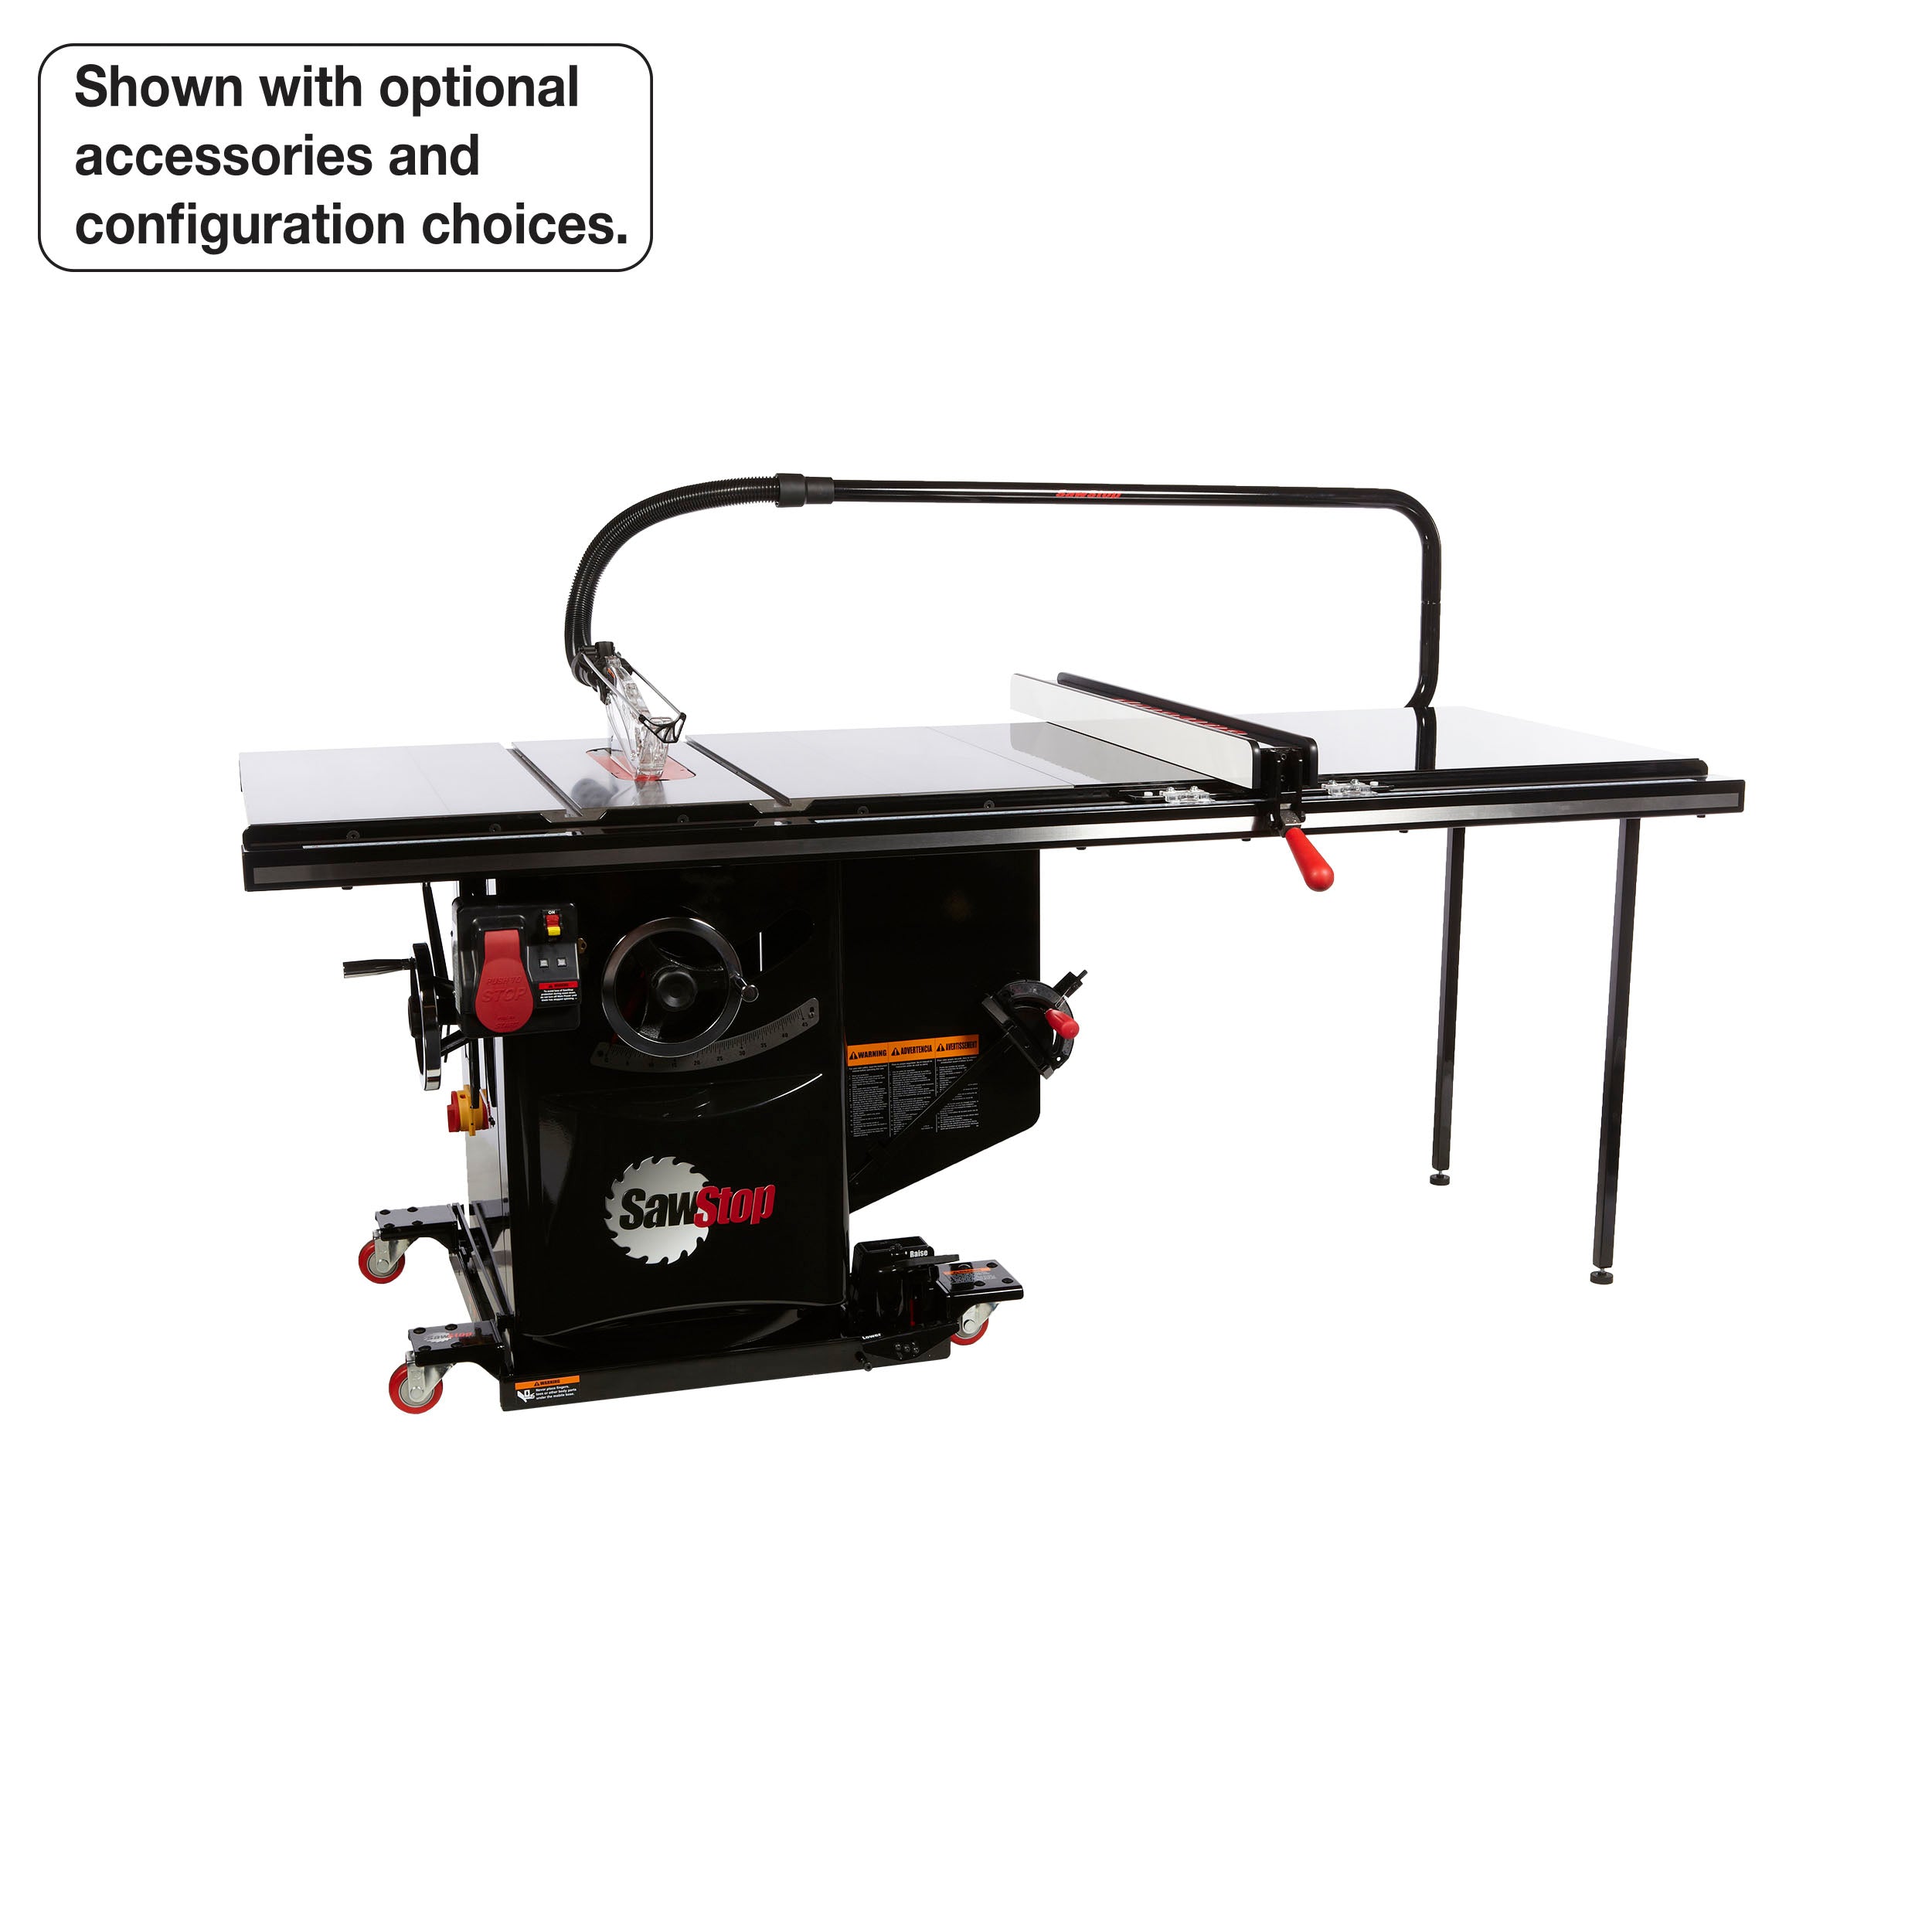 SawStop 3HP, 1ph, 230v Industrial Cabinet Saw w/ 36